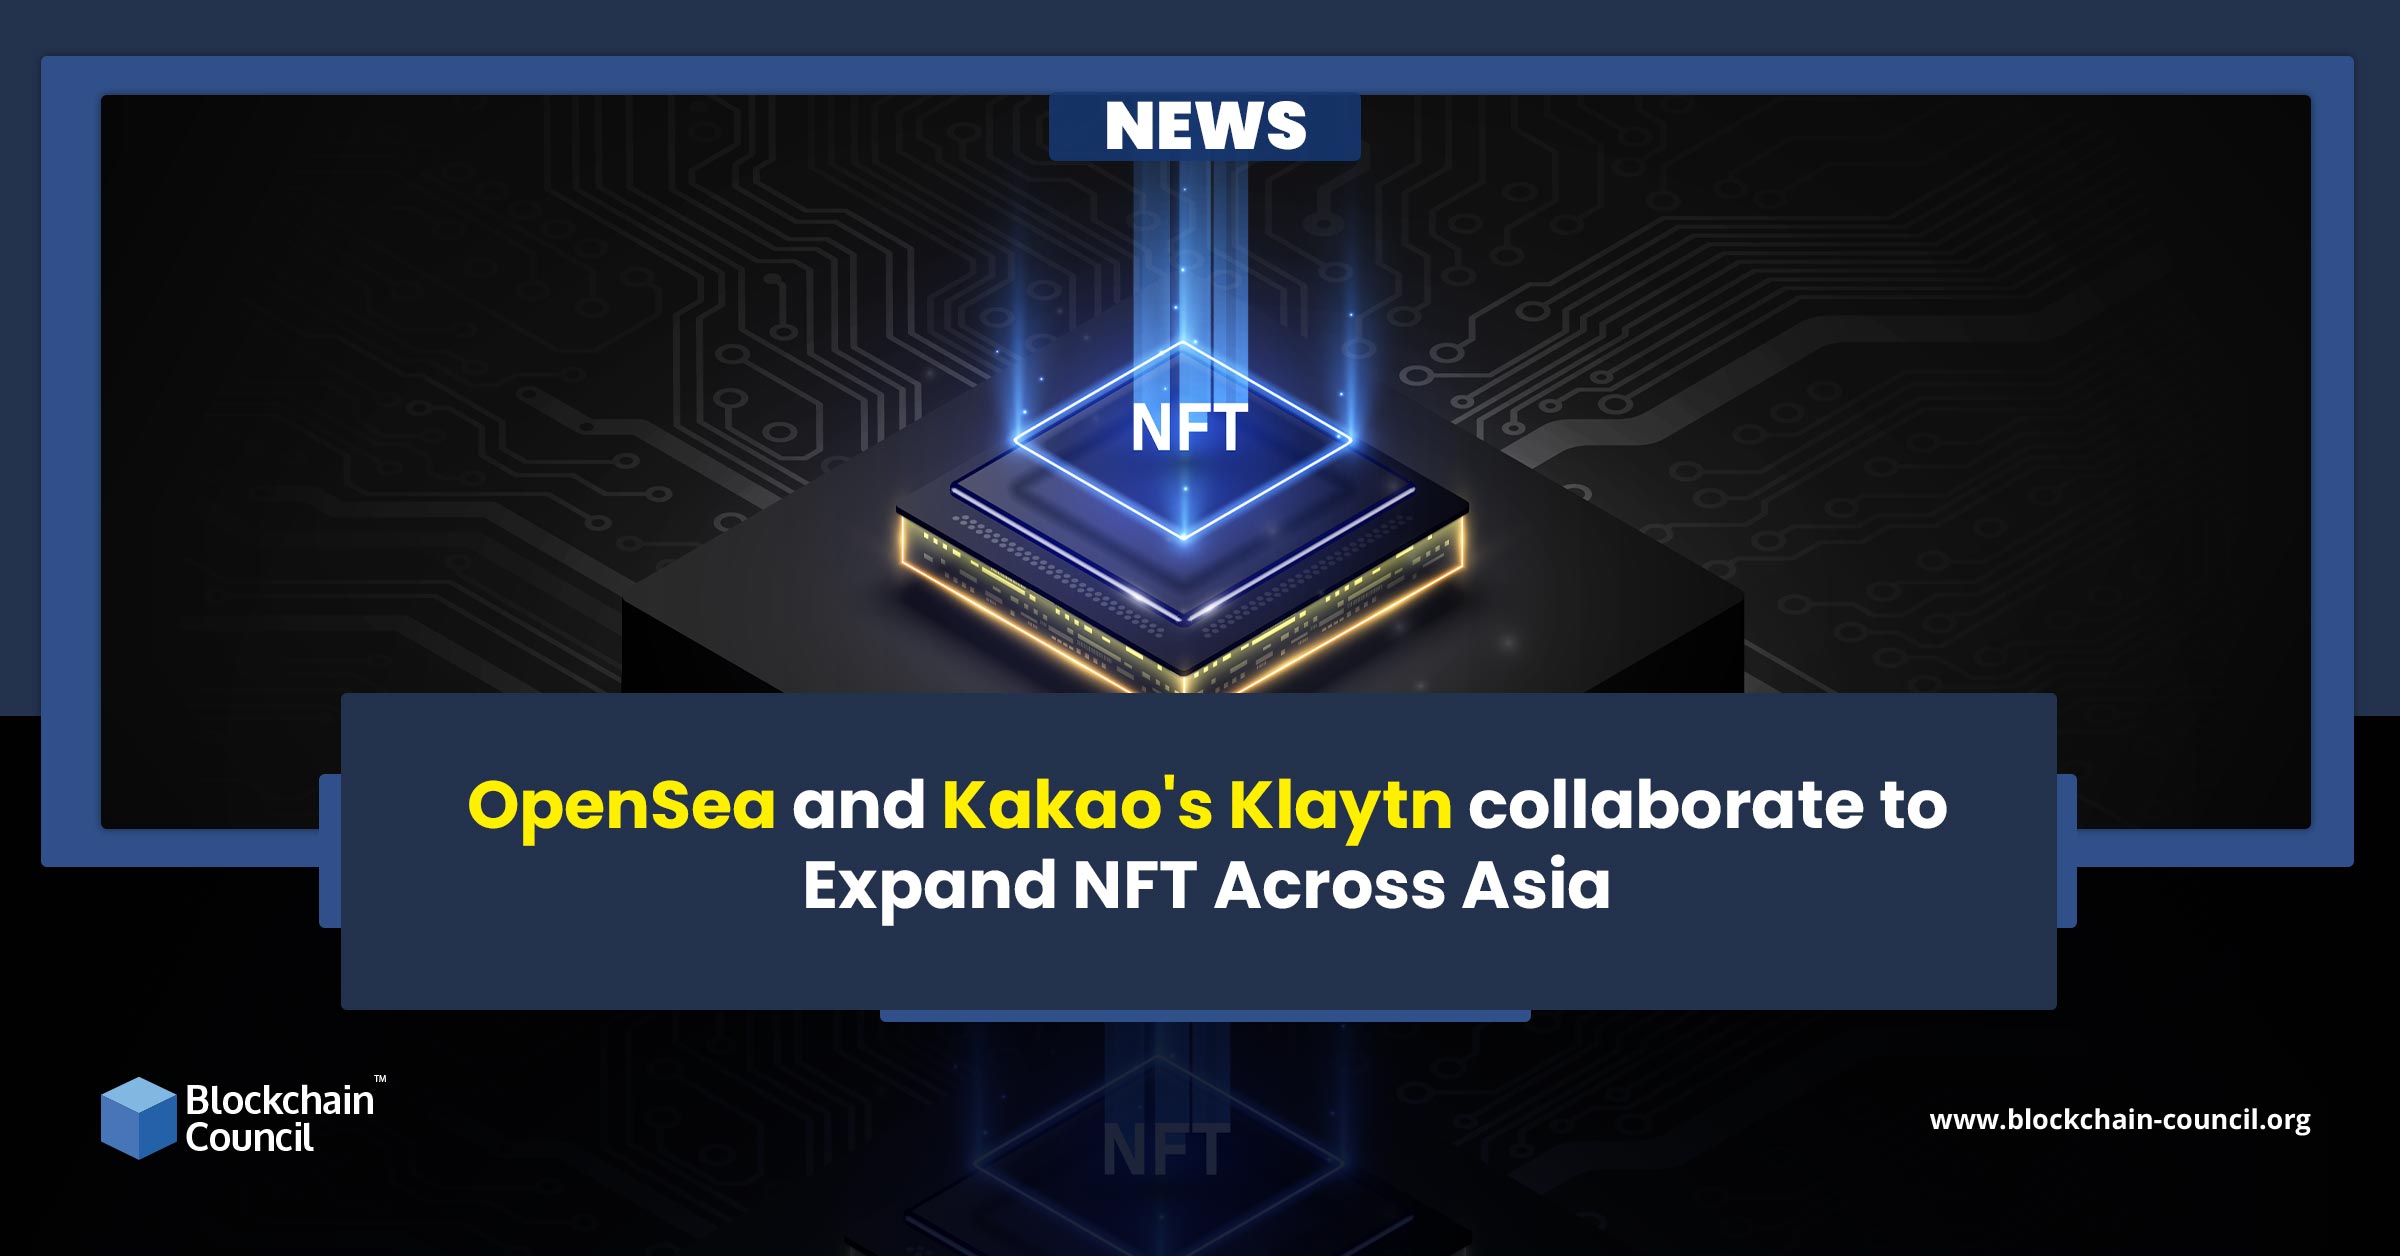 OpenSea and Kakao’s Klaytn collaborate to Expand NFT Across Asia